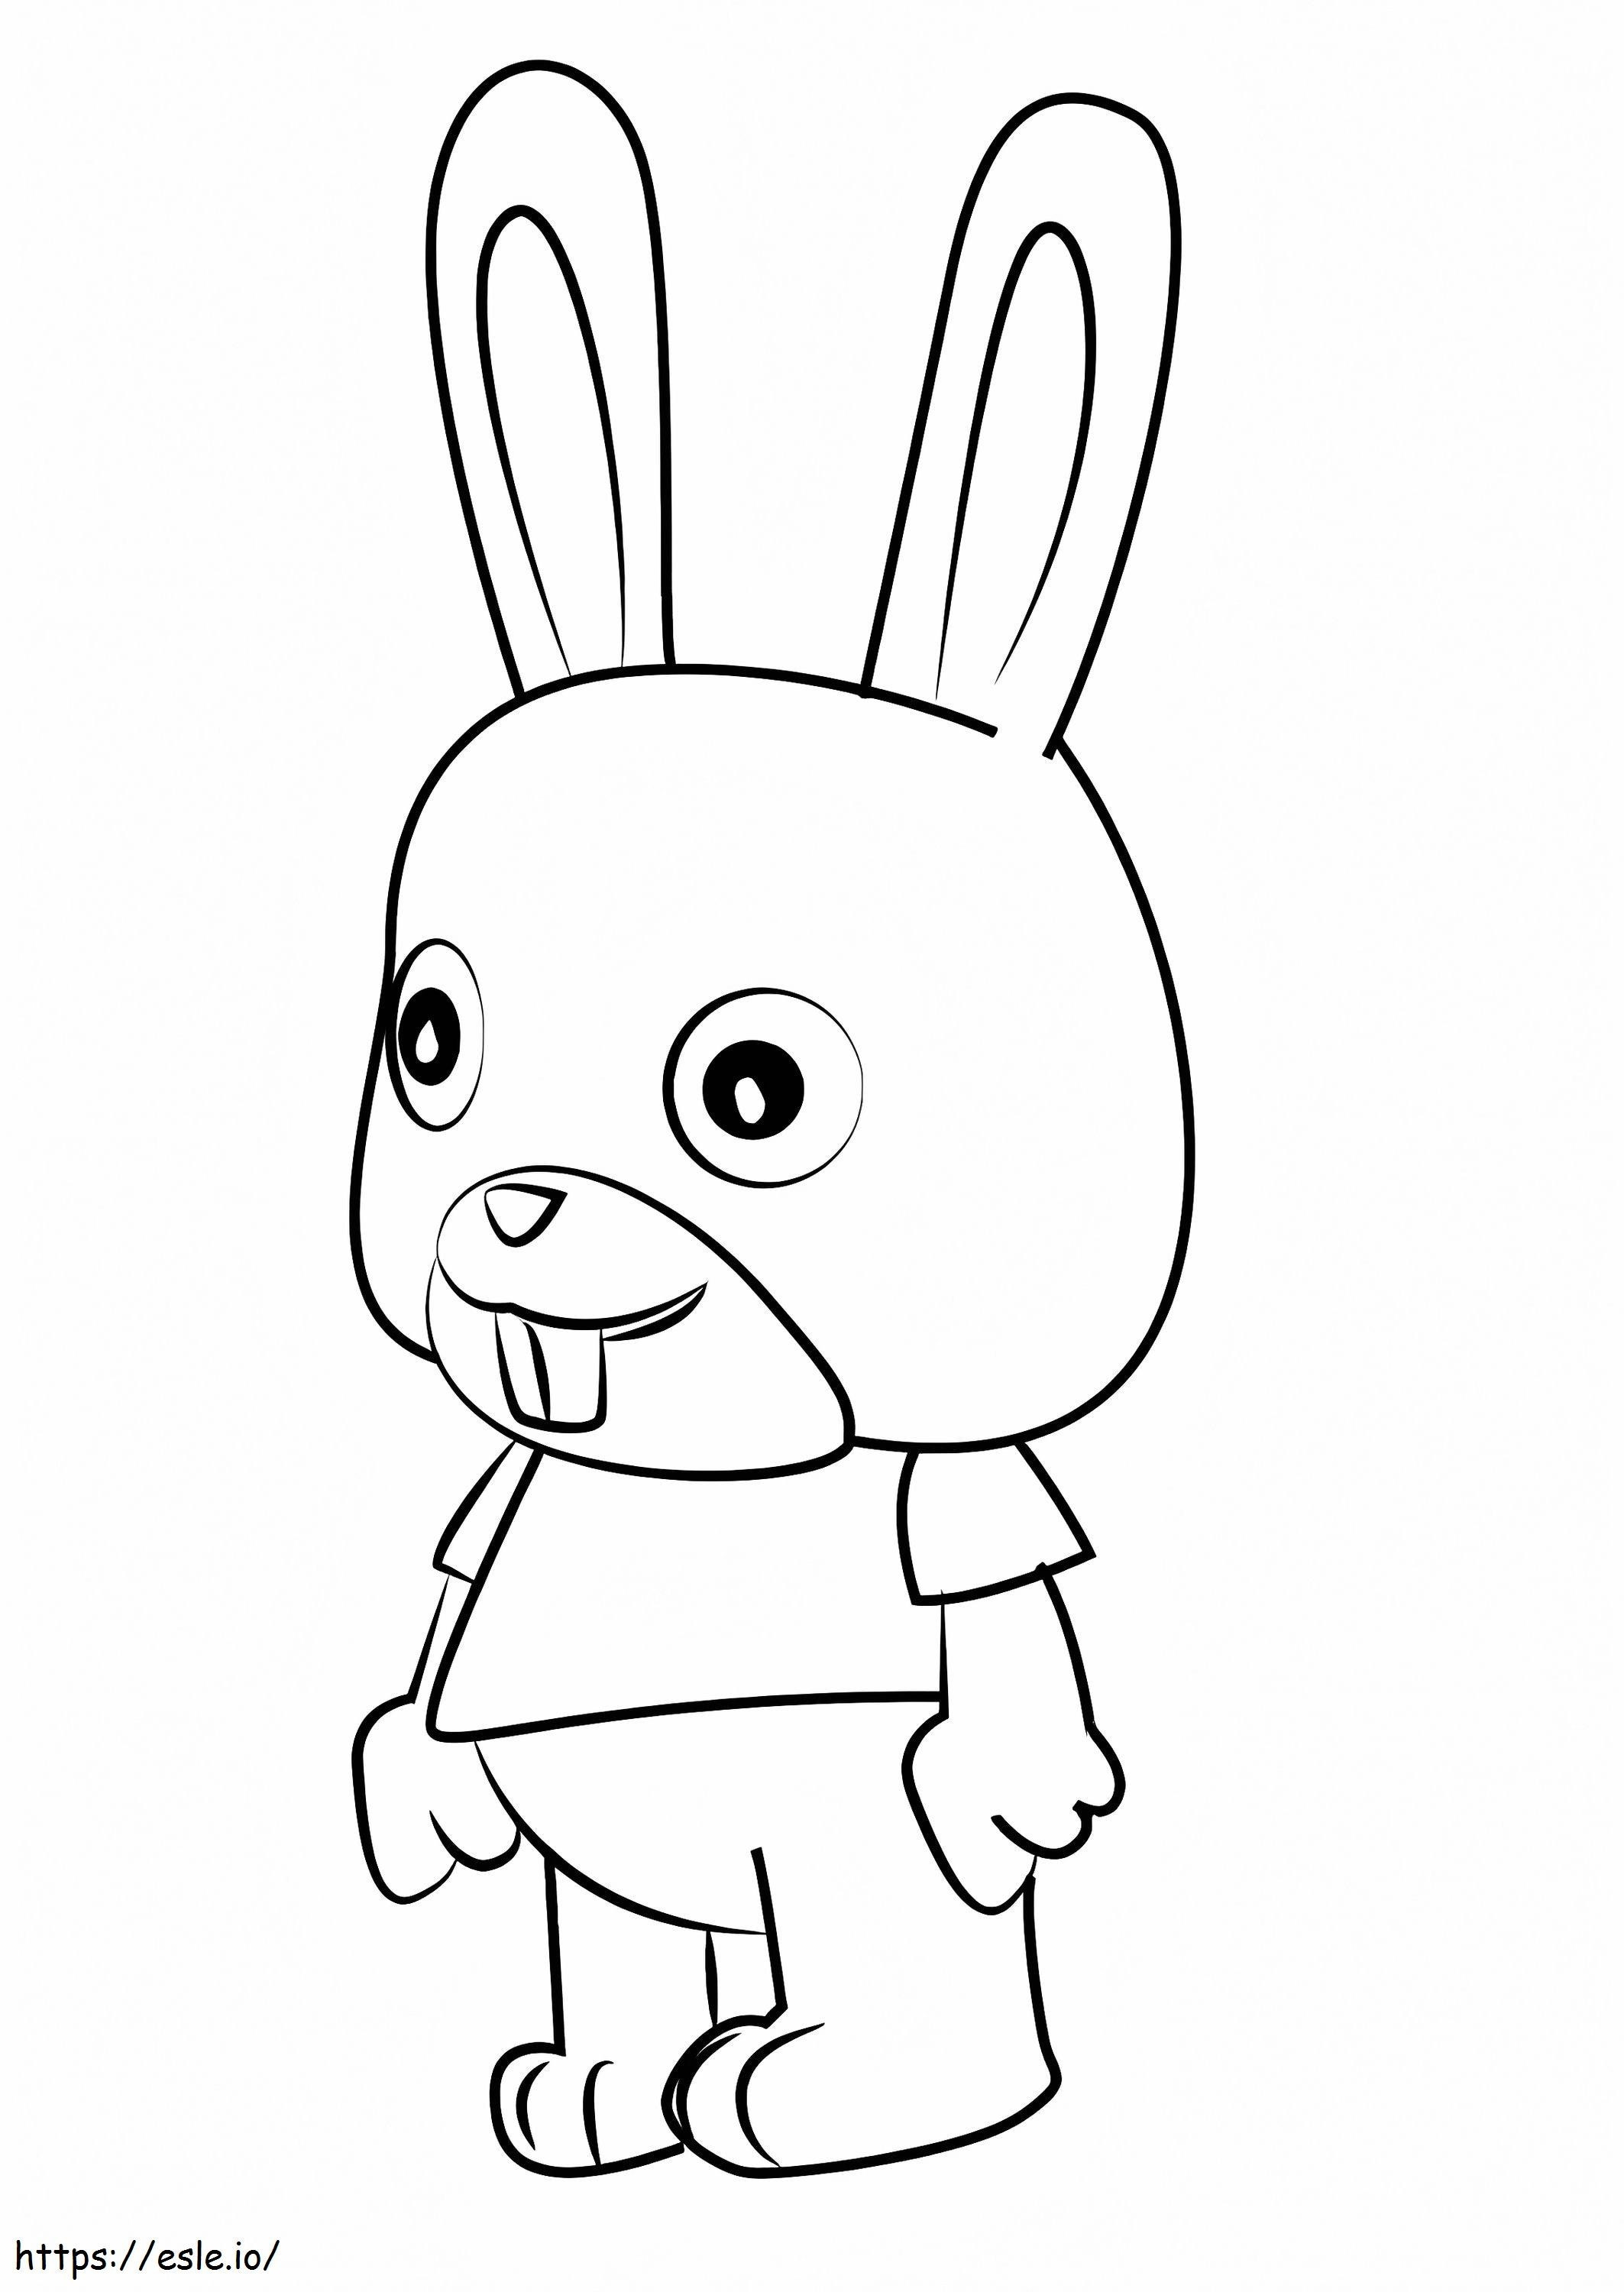 Buster From Sheriff Callie coloring page